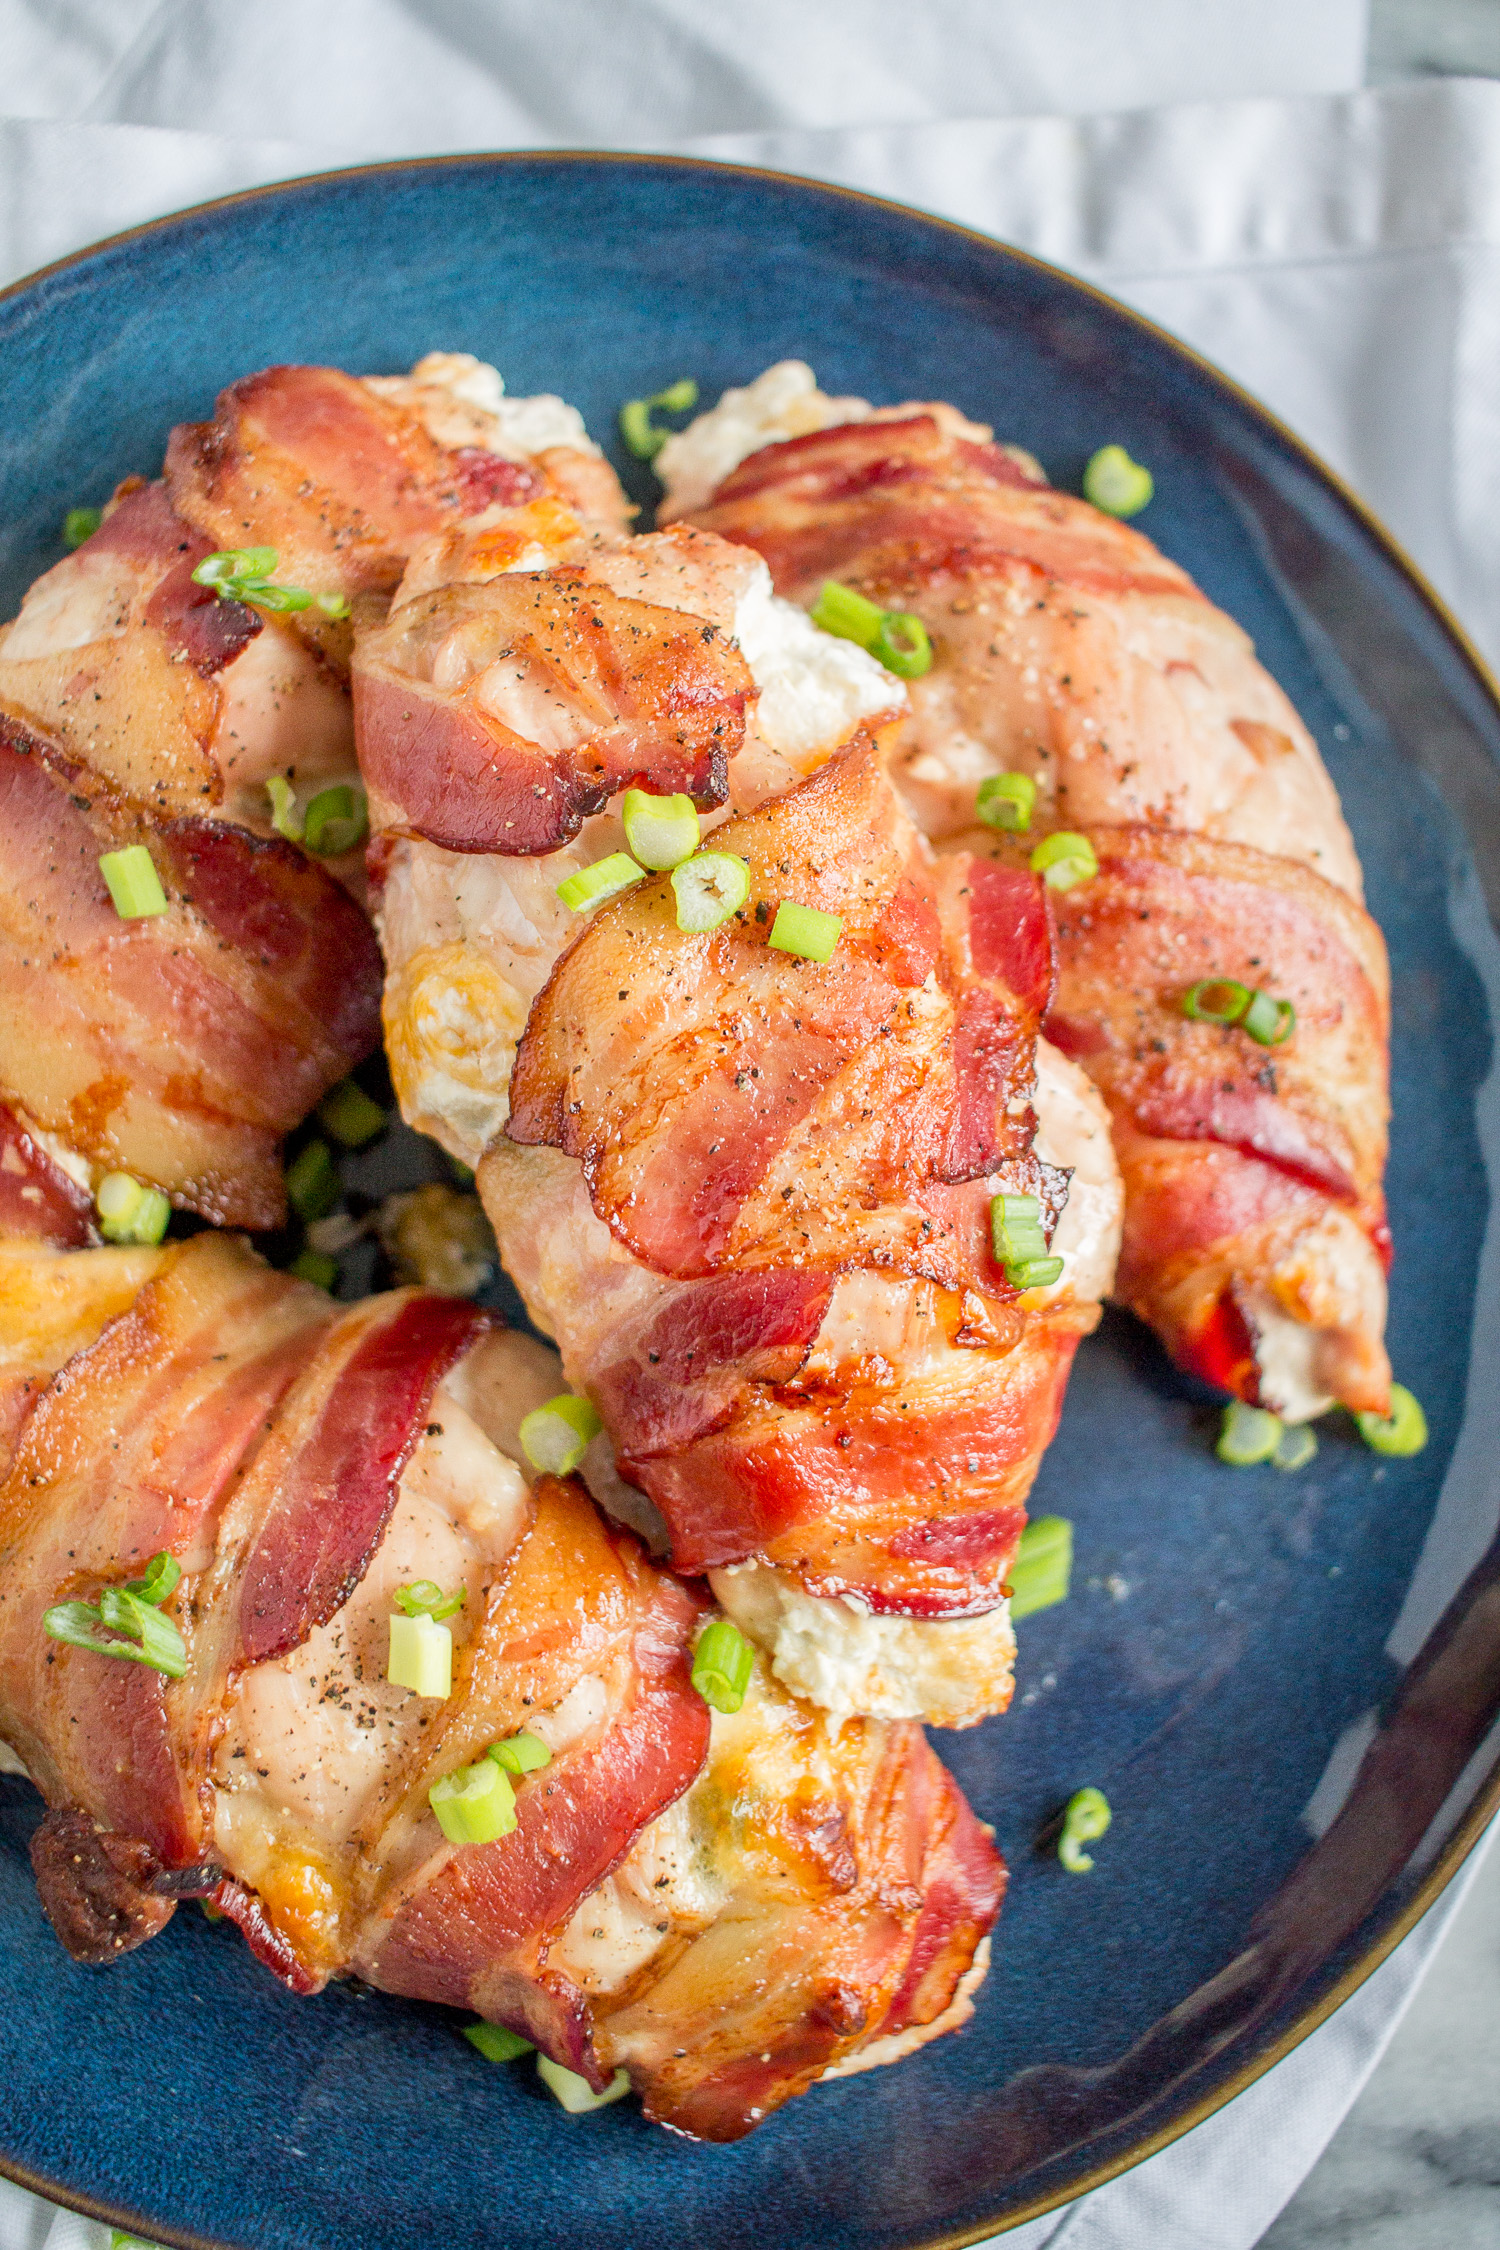 Bacon Wrapped Jalapeno Popper Chicken Thekittchen,What Is Triple Sec Syrup